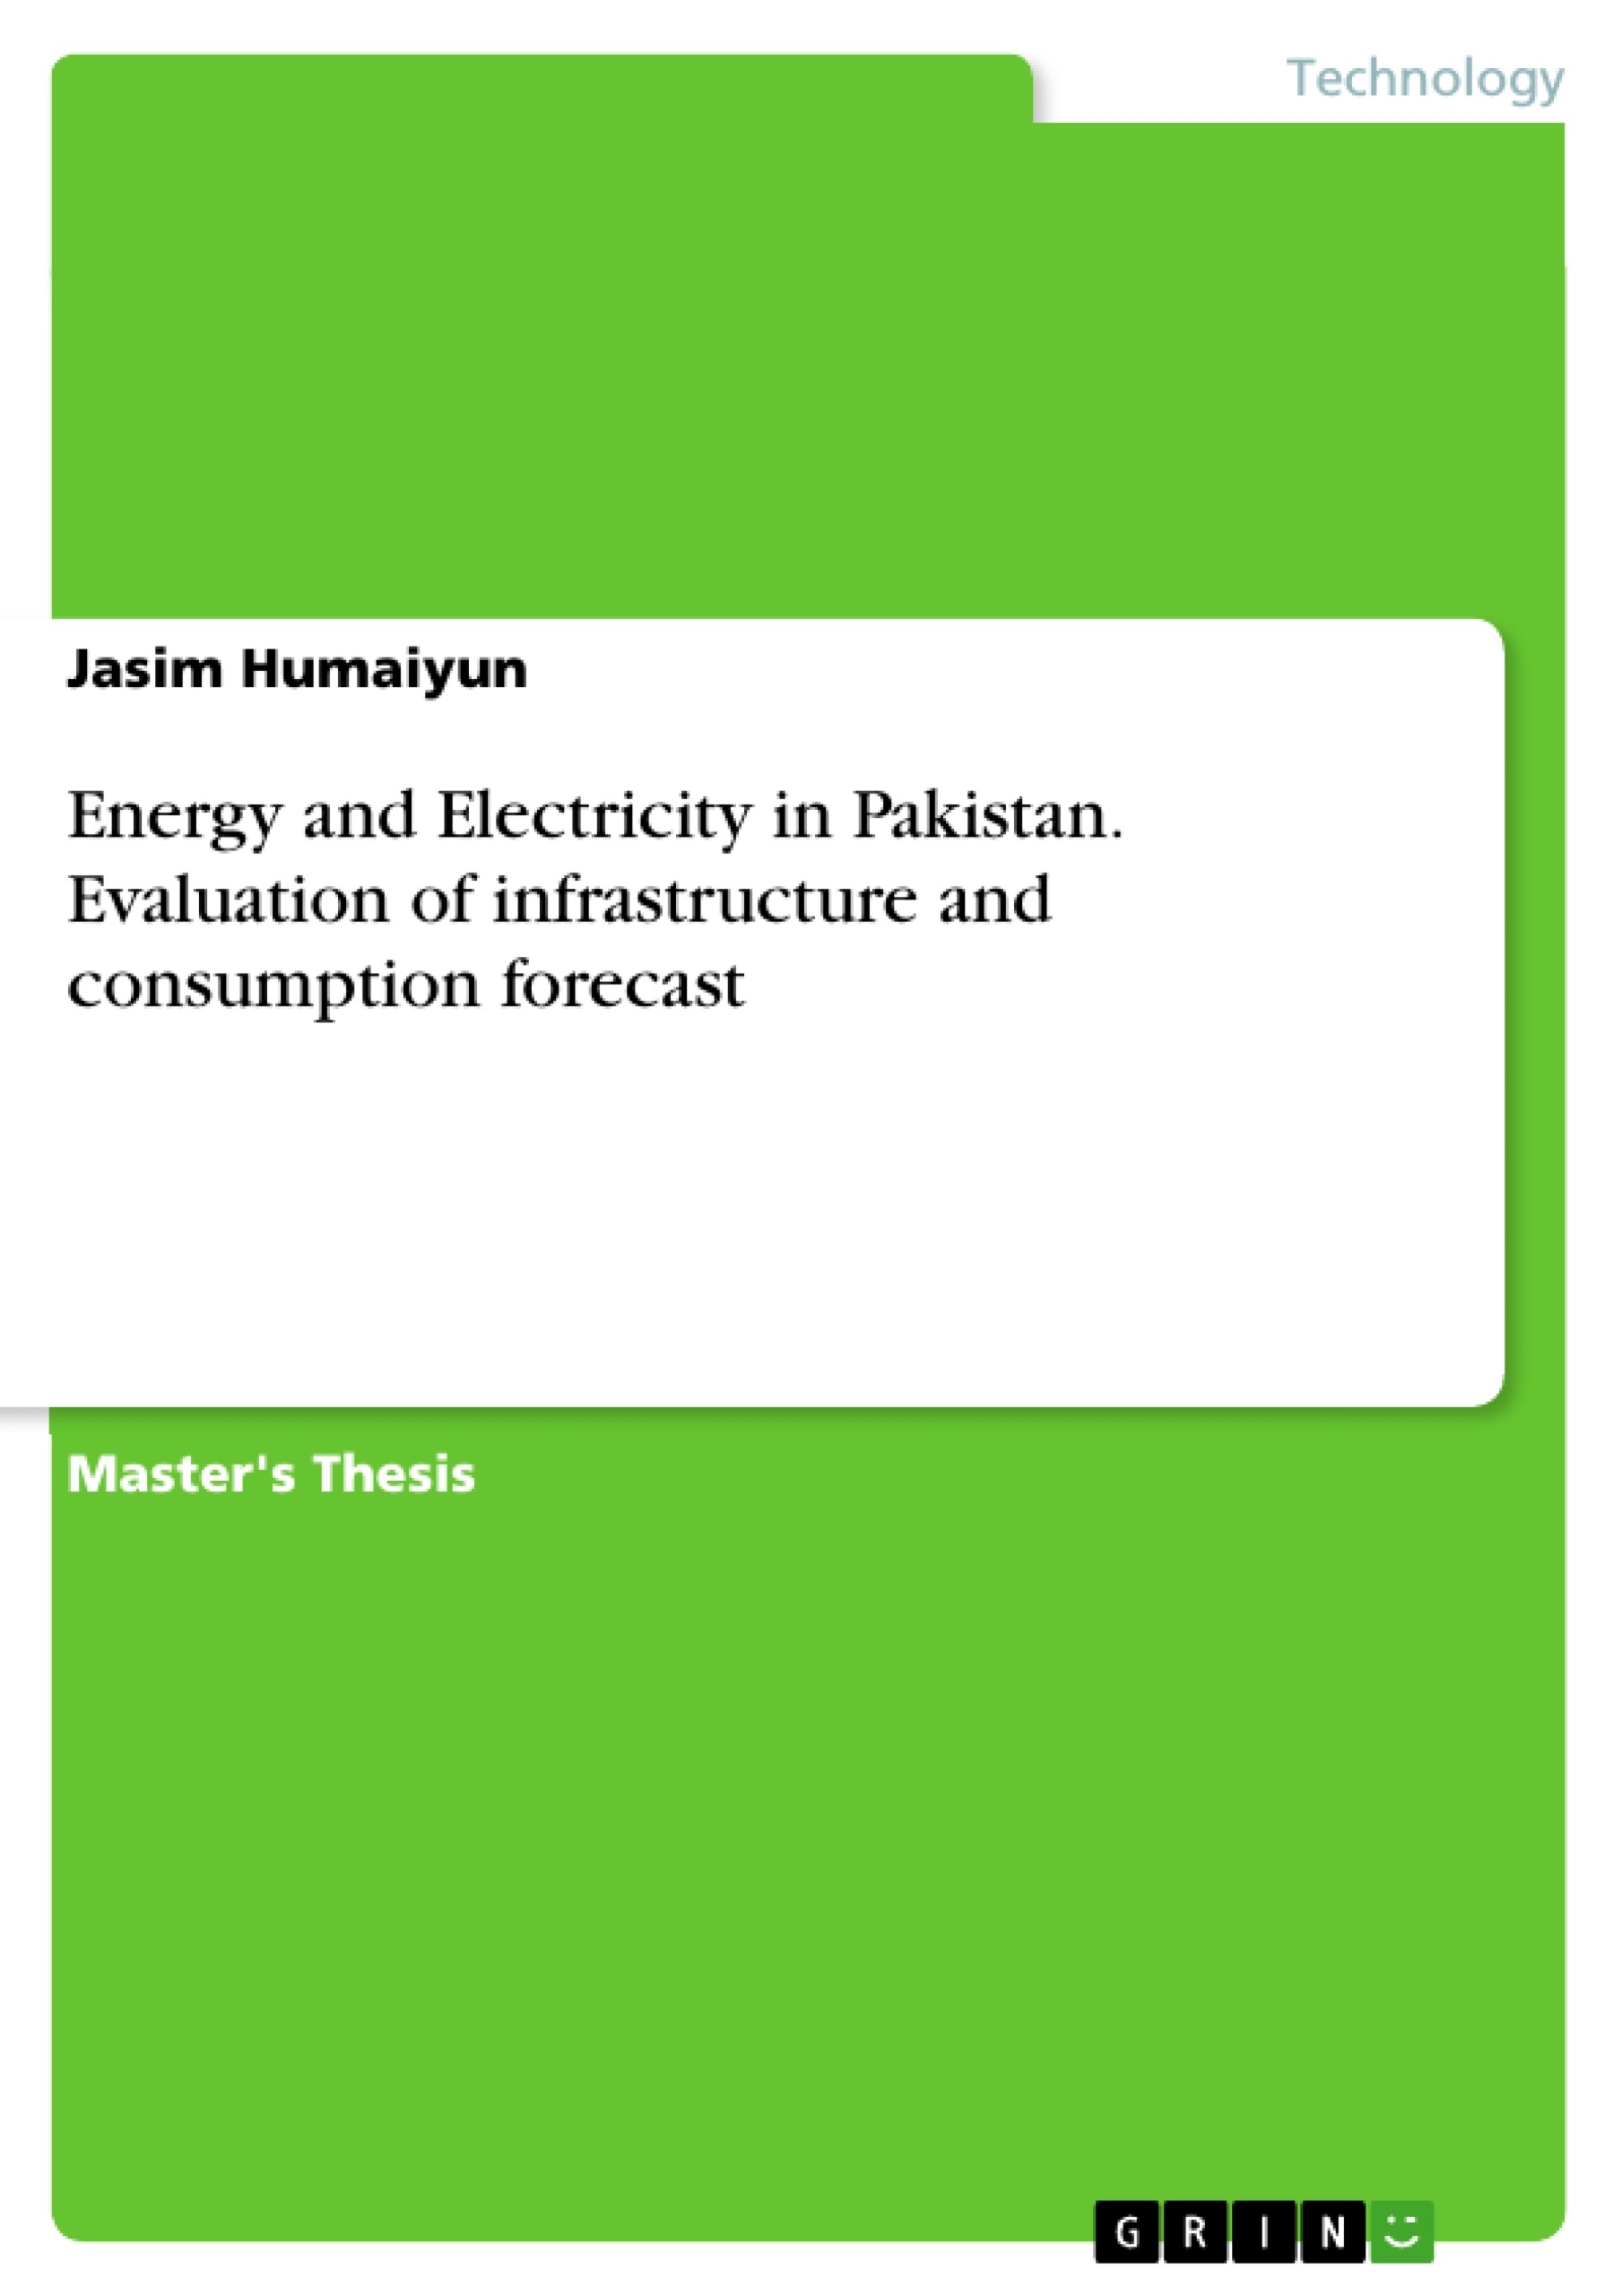 Title: Energy and Electricity in Pakistan. Evaluation of infrastructure and consumption forecast